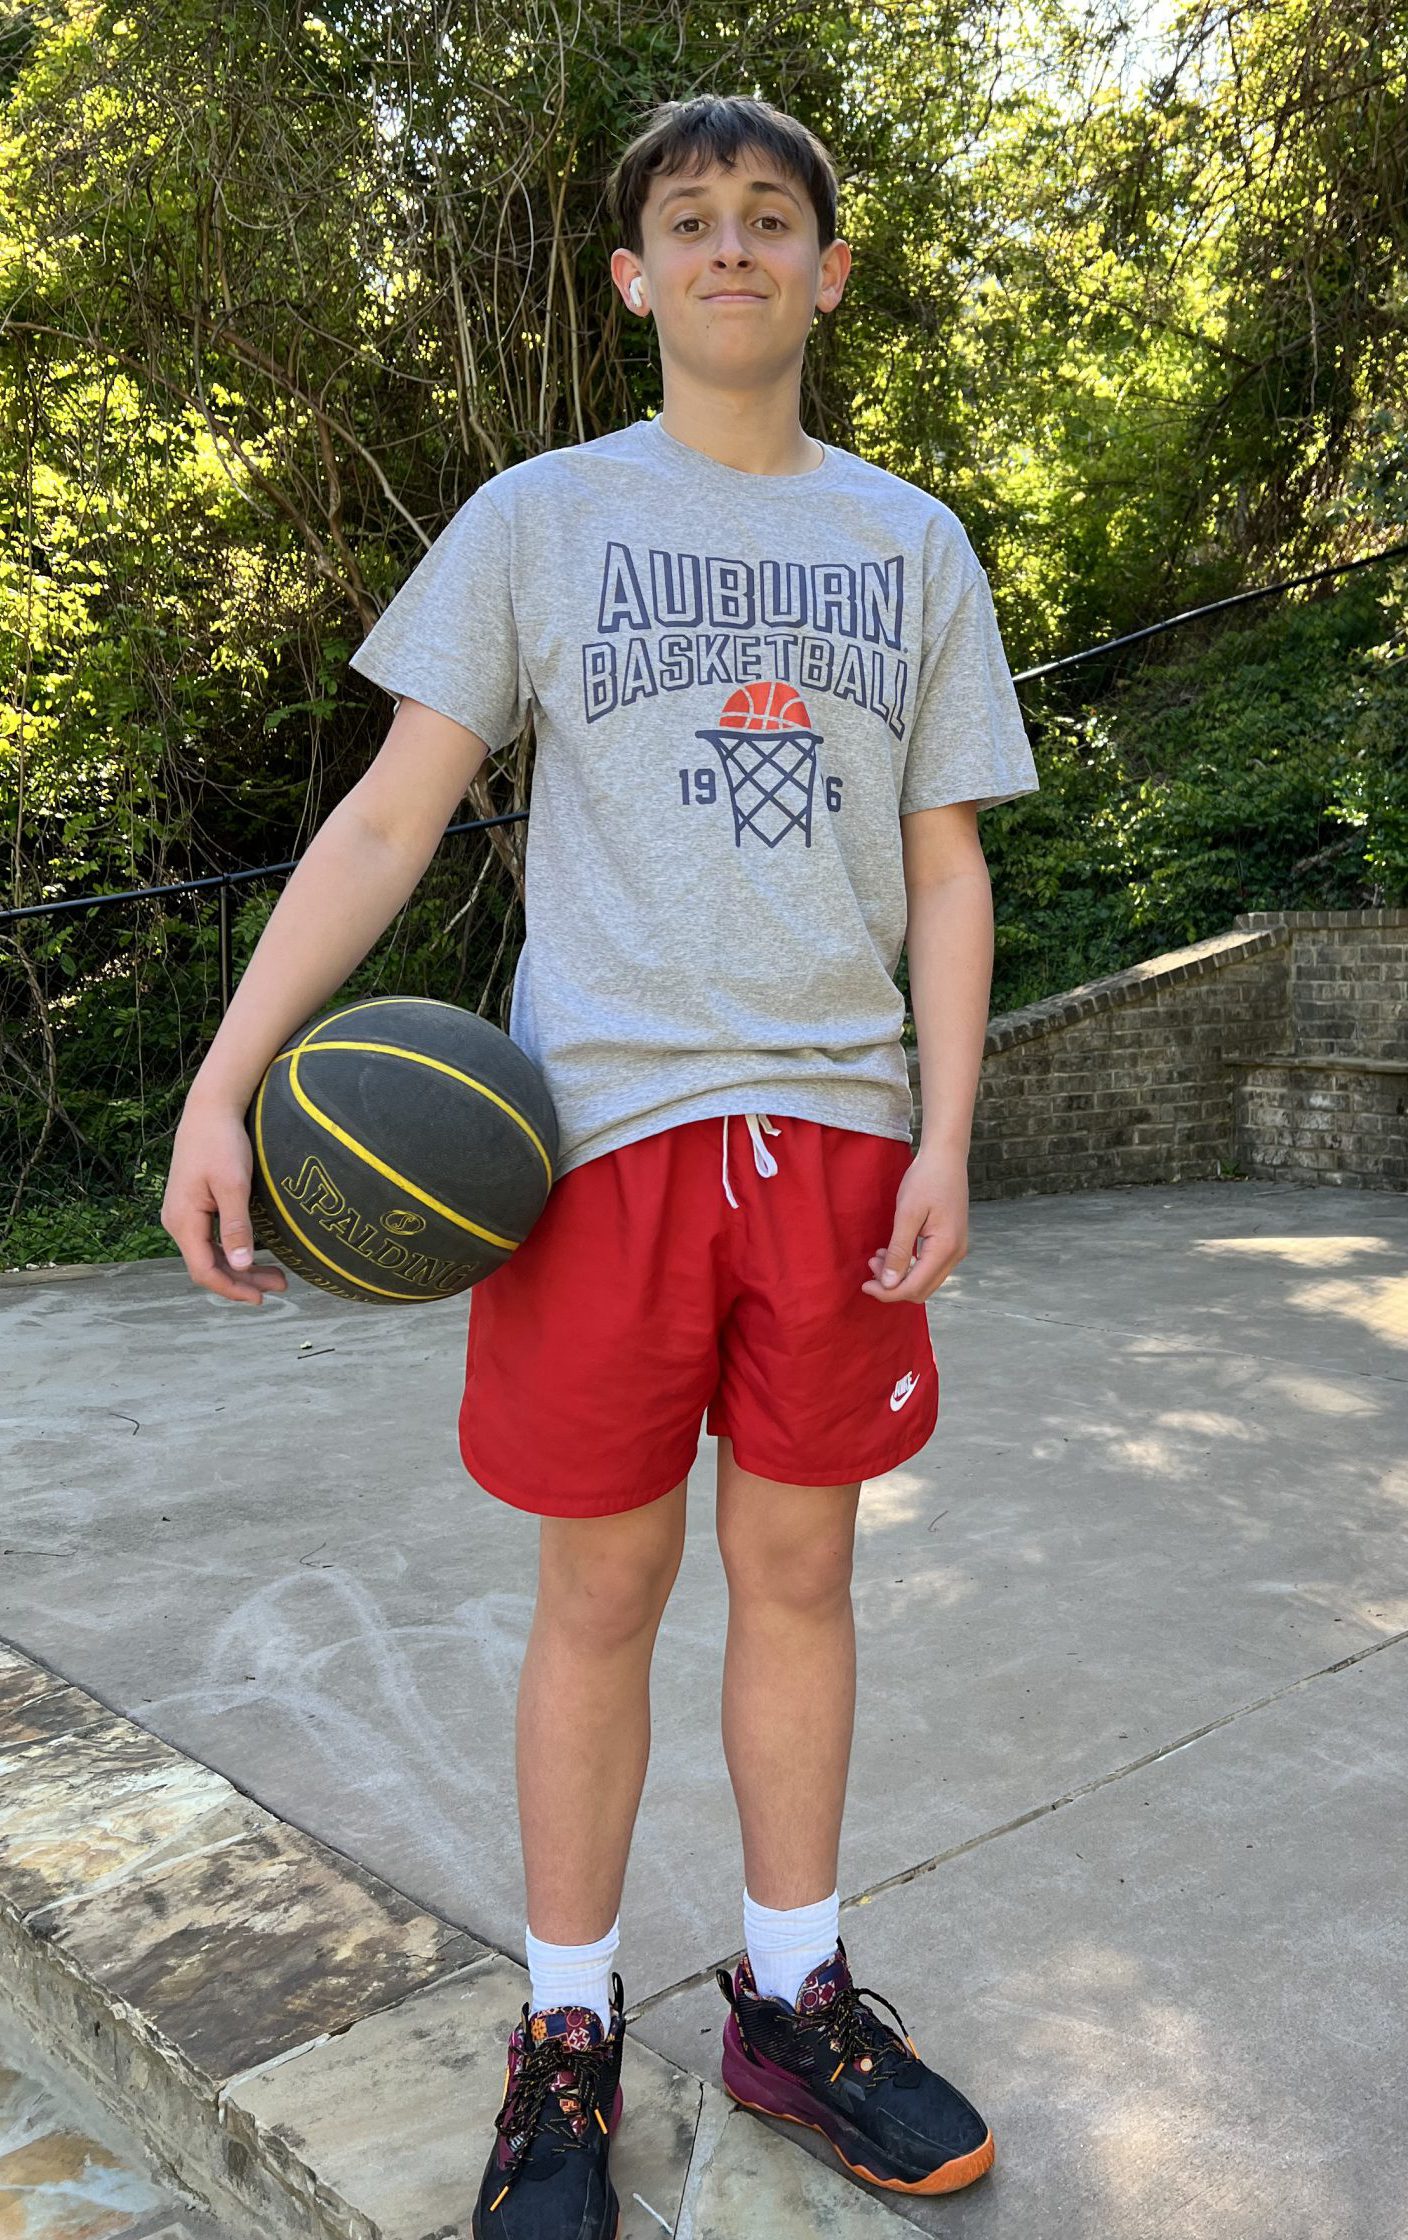 Caucasian teen with grey t-shirt and red shorts holds a black and yellow basketball.